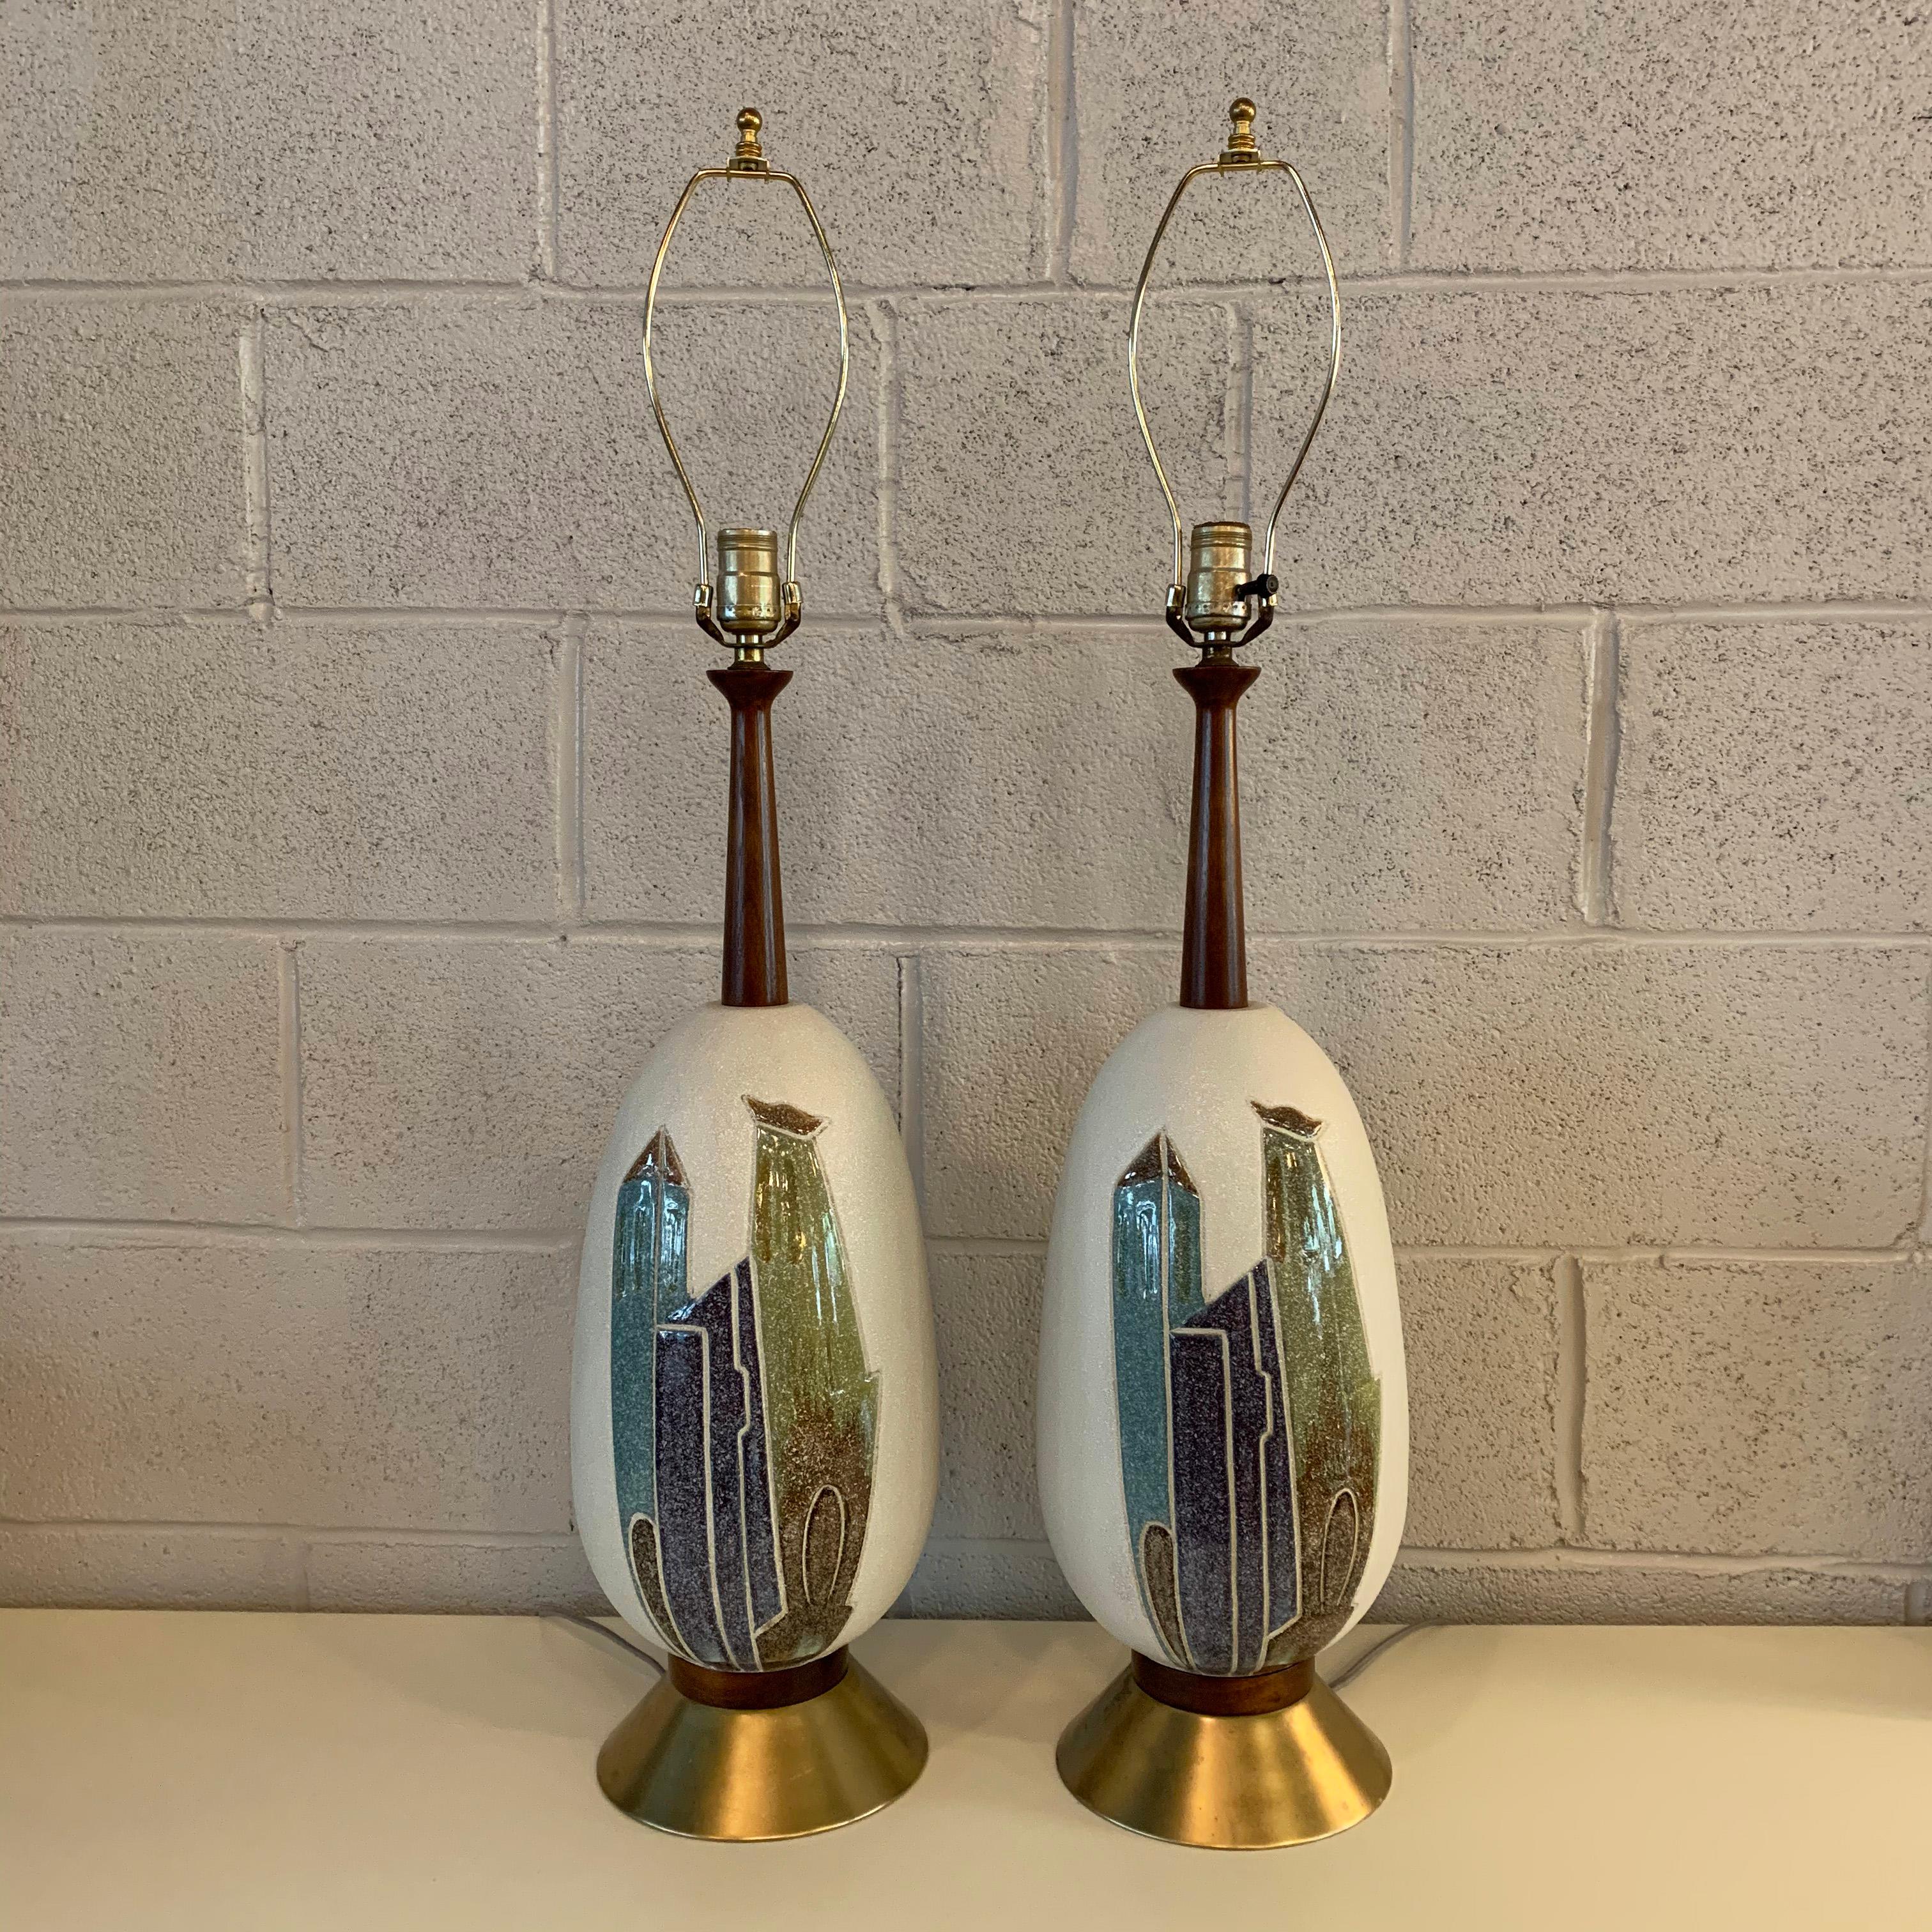 20th Century Pair of Mid-Century Modern Art Pottery Table Lamps